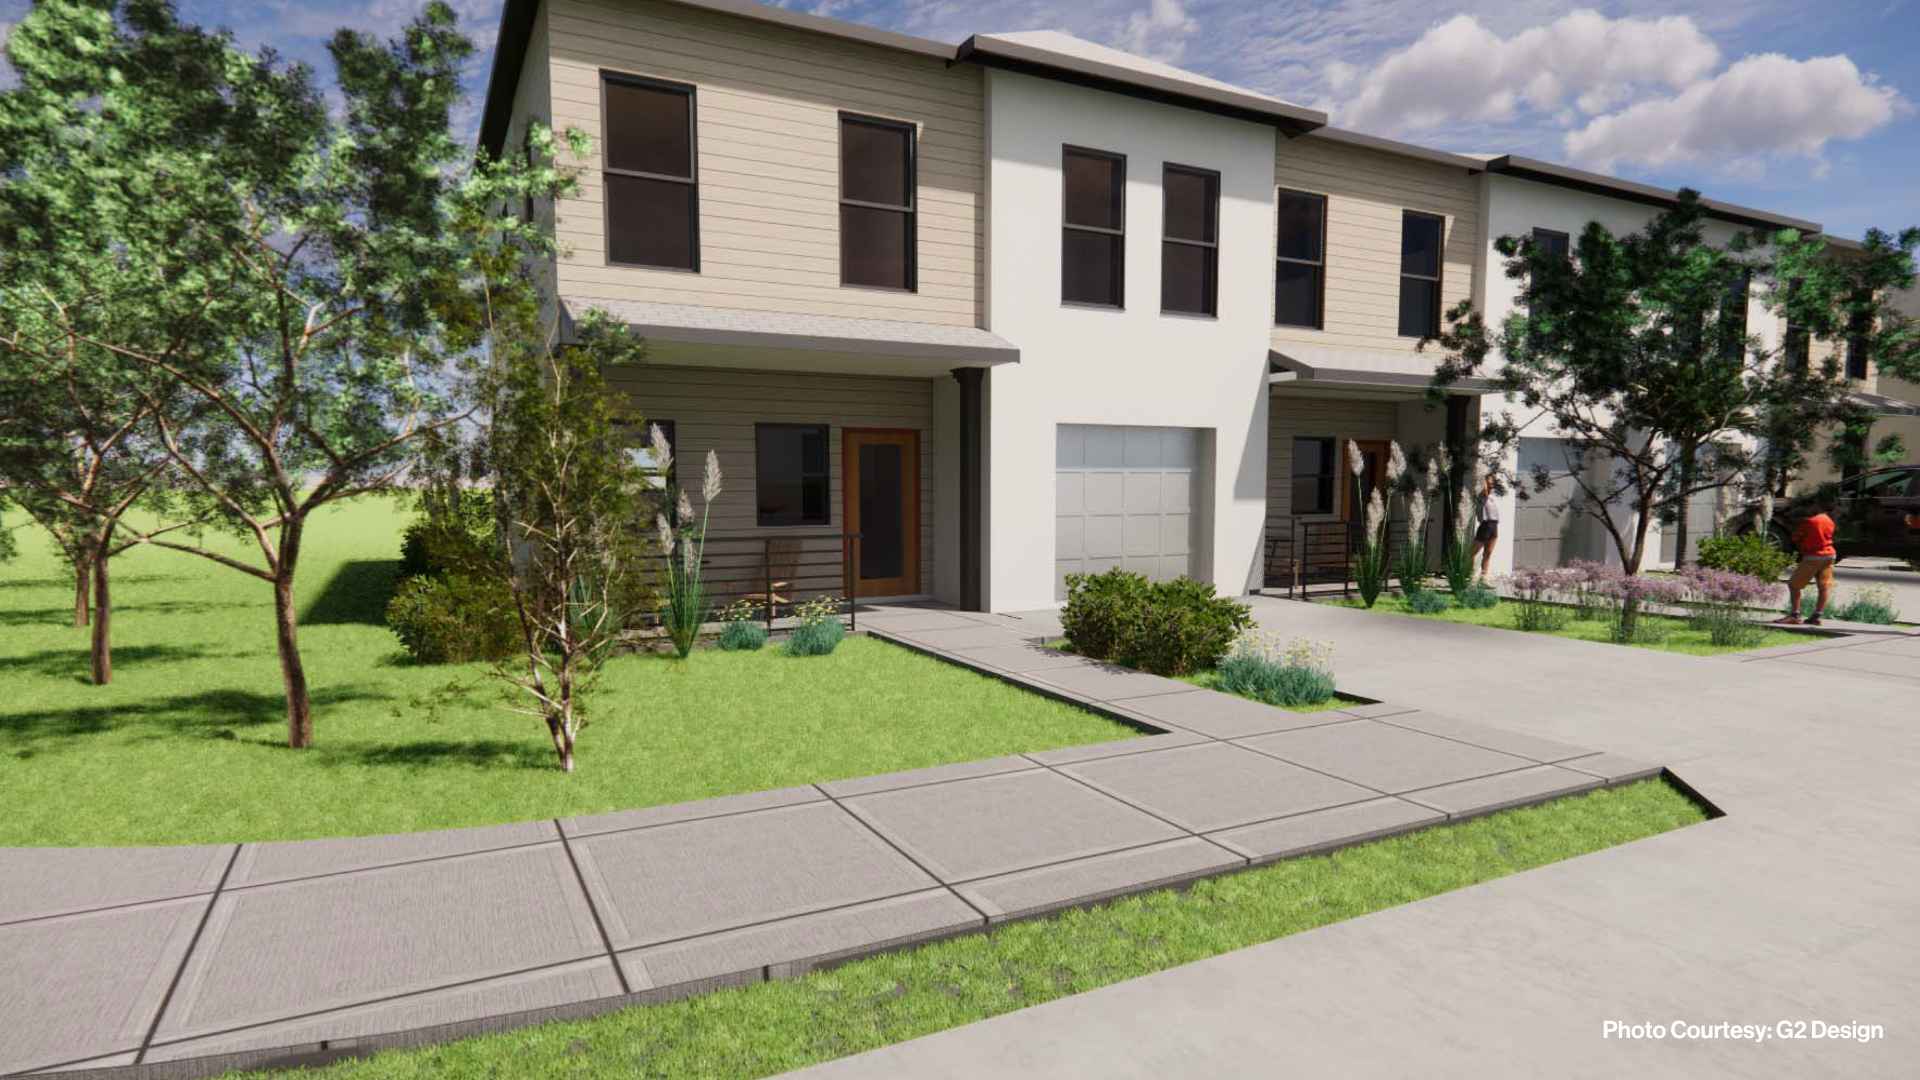 Habitat for Humanity of Pinellas and West Pasco Counties to break ground on Largo townhome project